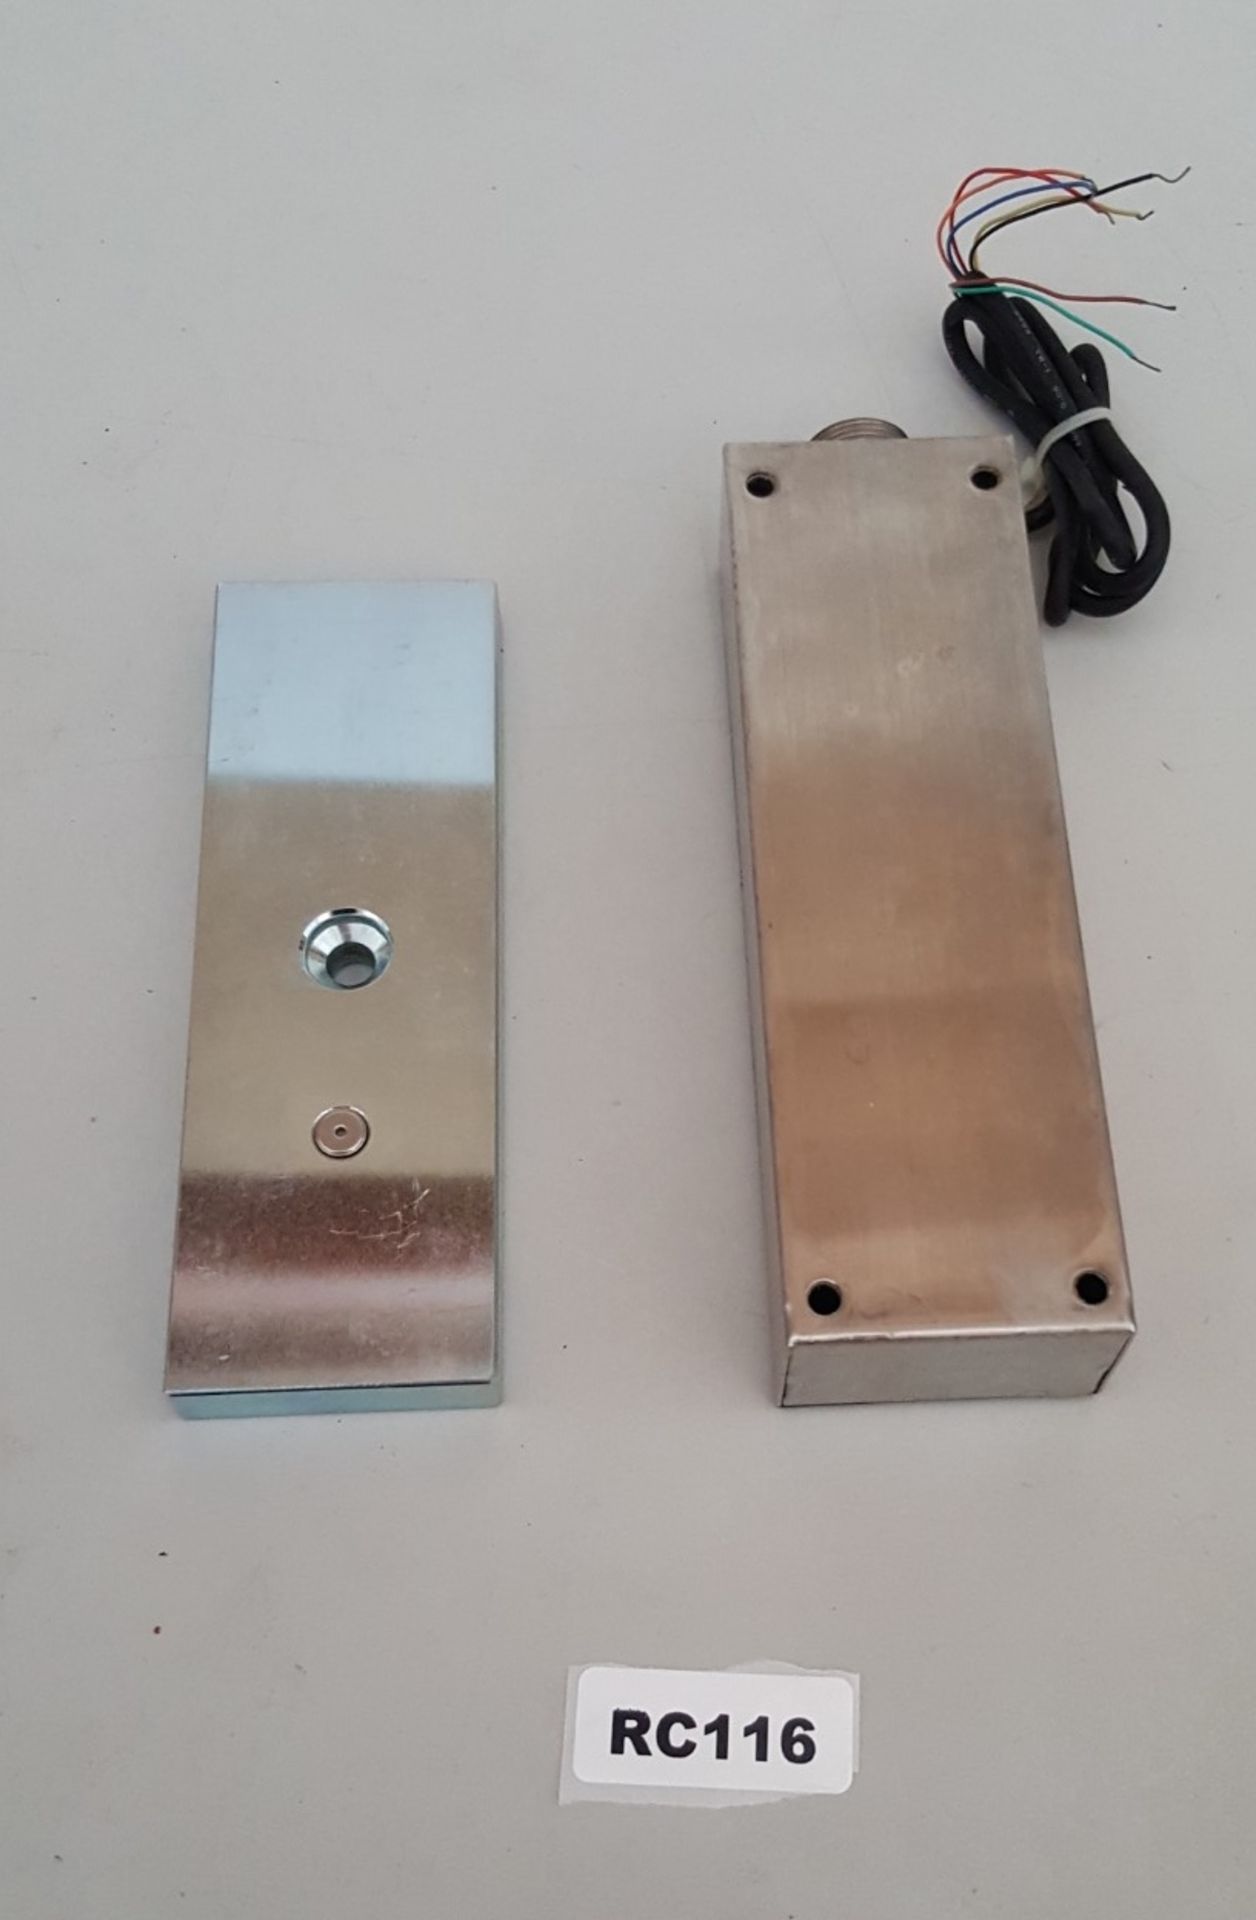 1 x Electromagnetic Outdoor Magnet lock ELS-1200-M - Ref RC116 - CL011 - Location: Altrincham WA14